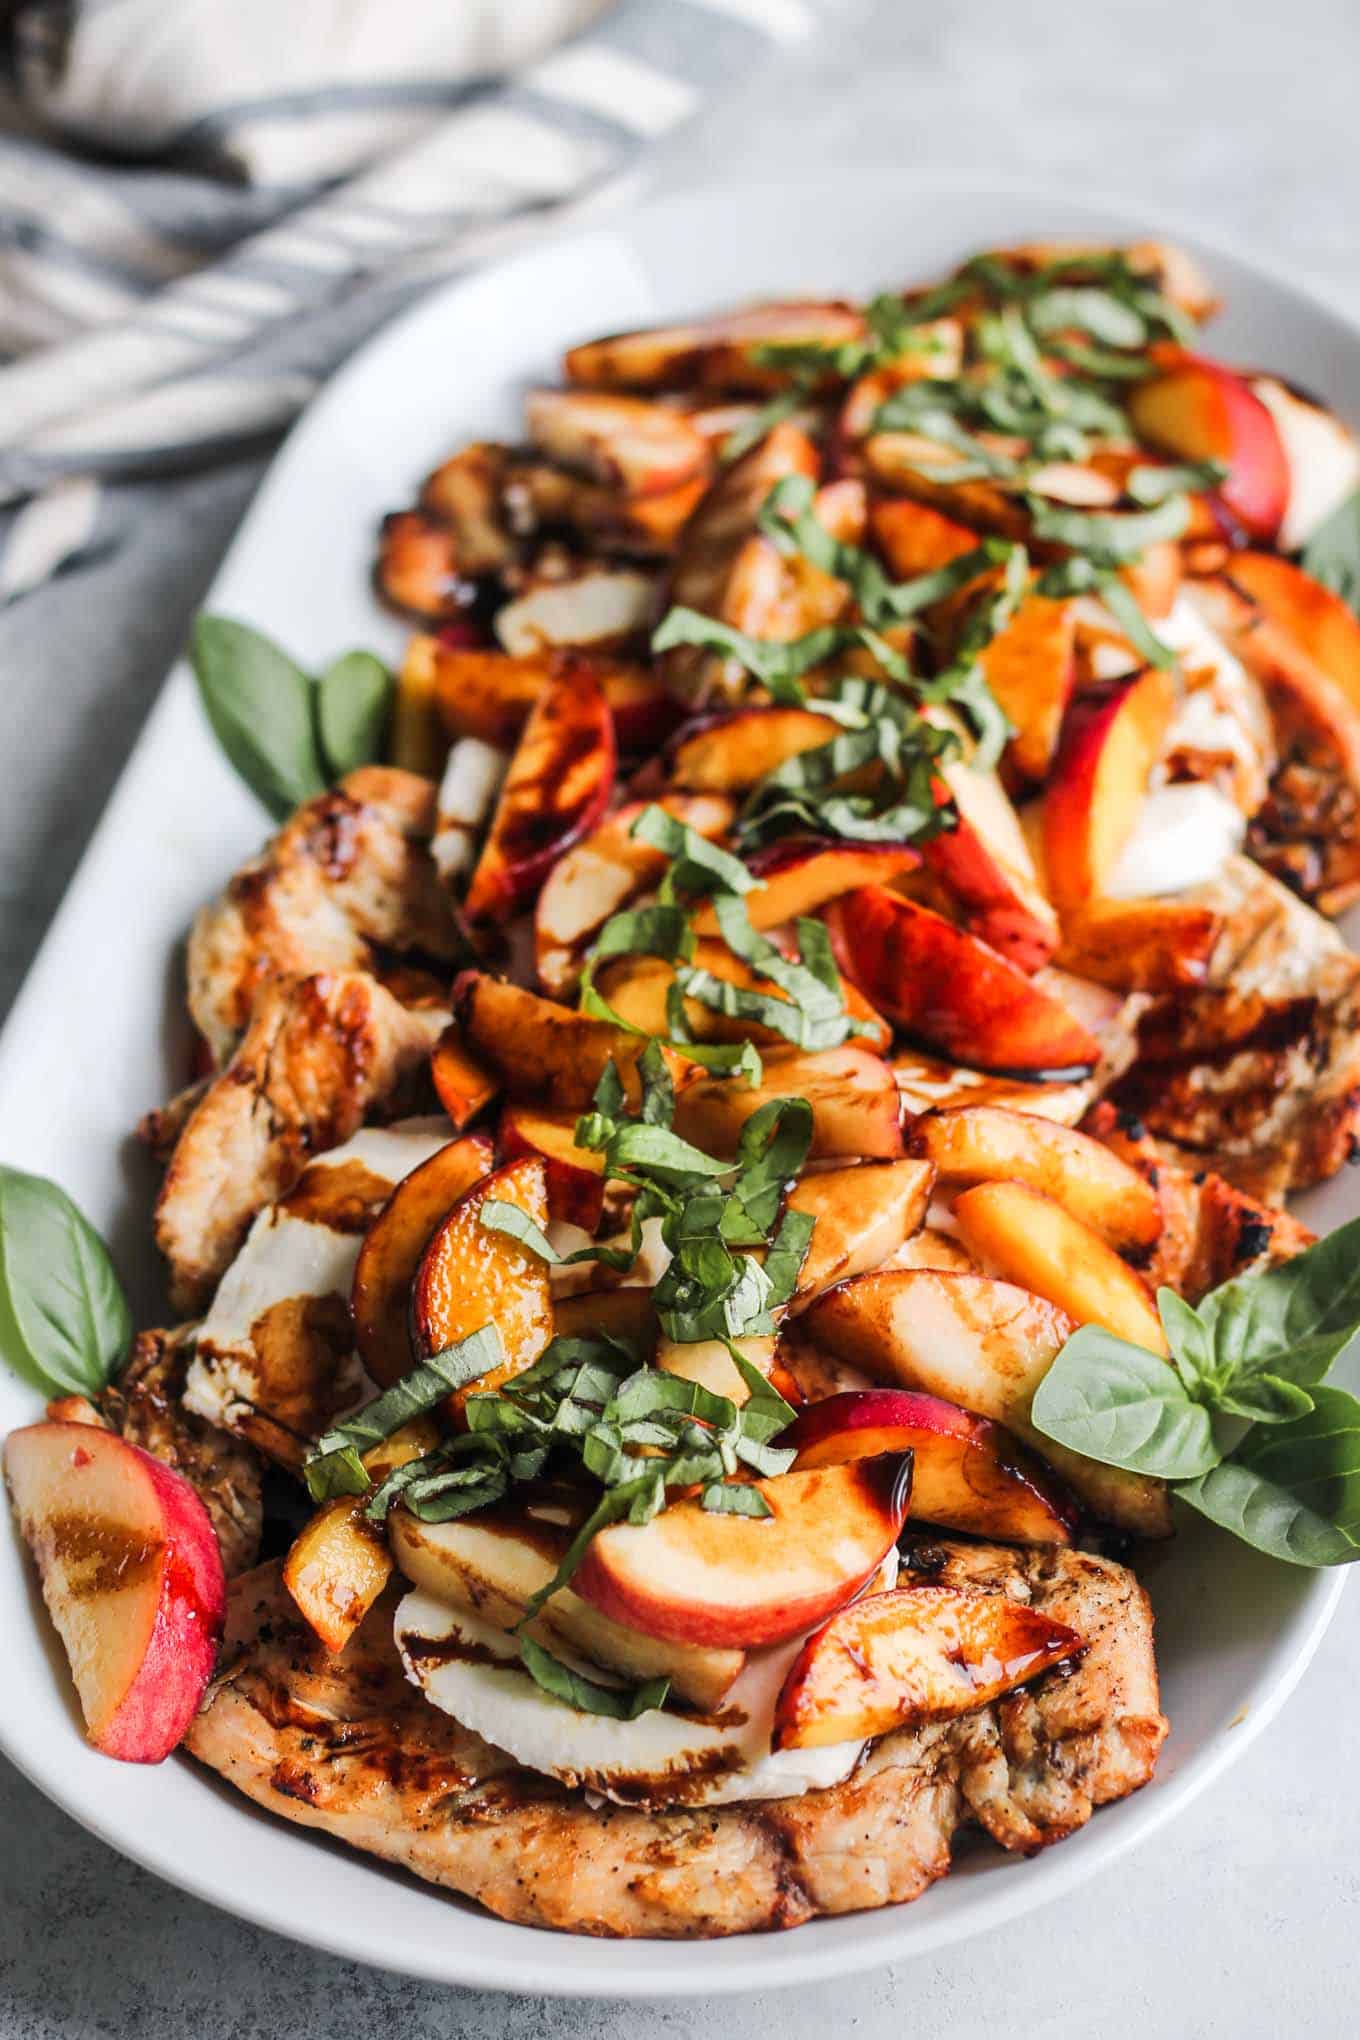 The Peach Caprese Grilled Chicken plated on a platter and ready to serve.